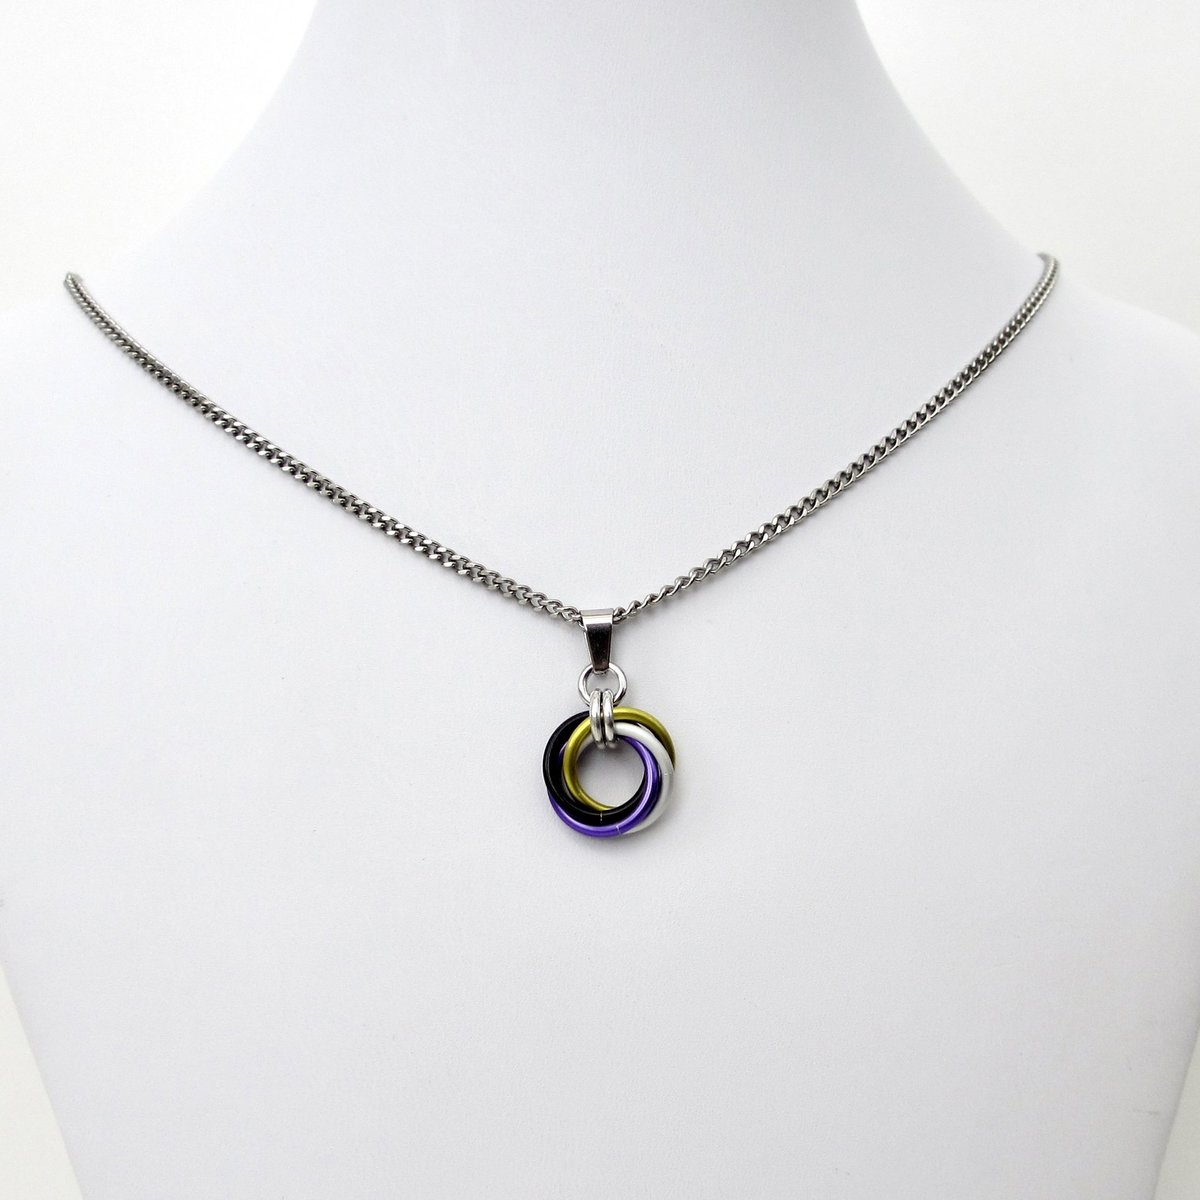 Nonbinary pendant, chainmail love knot necklace; yellow, white, purple, black